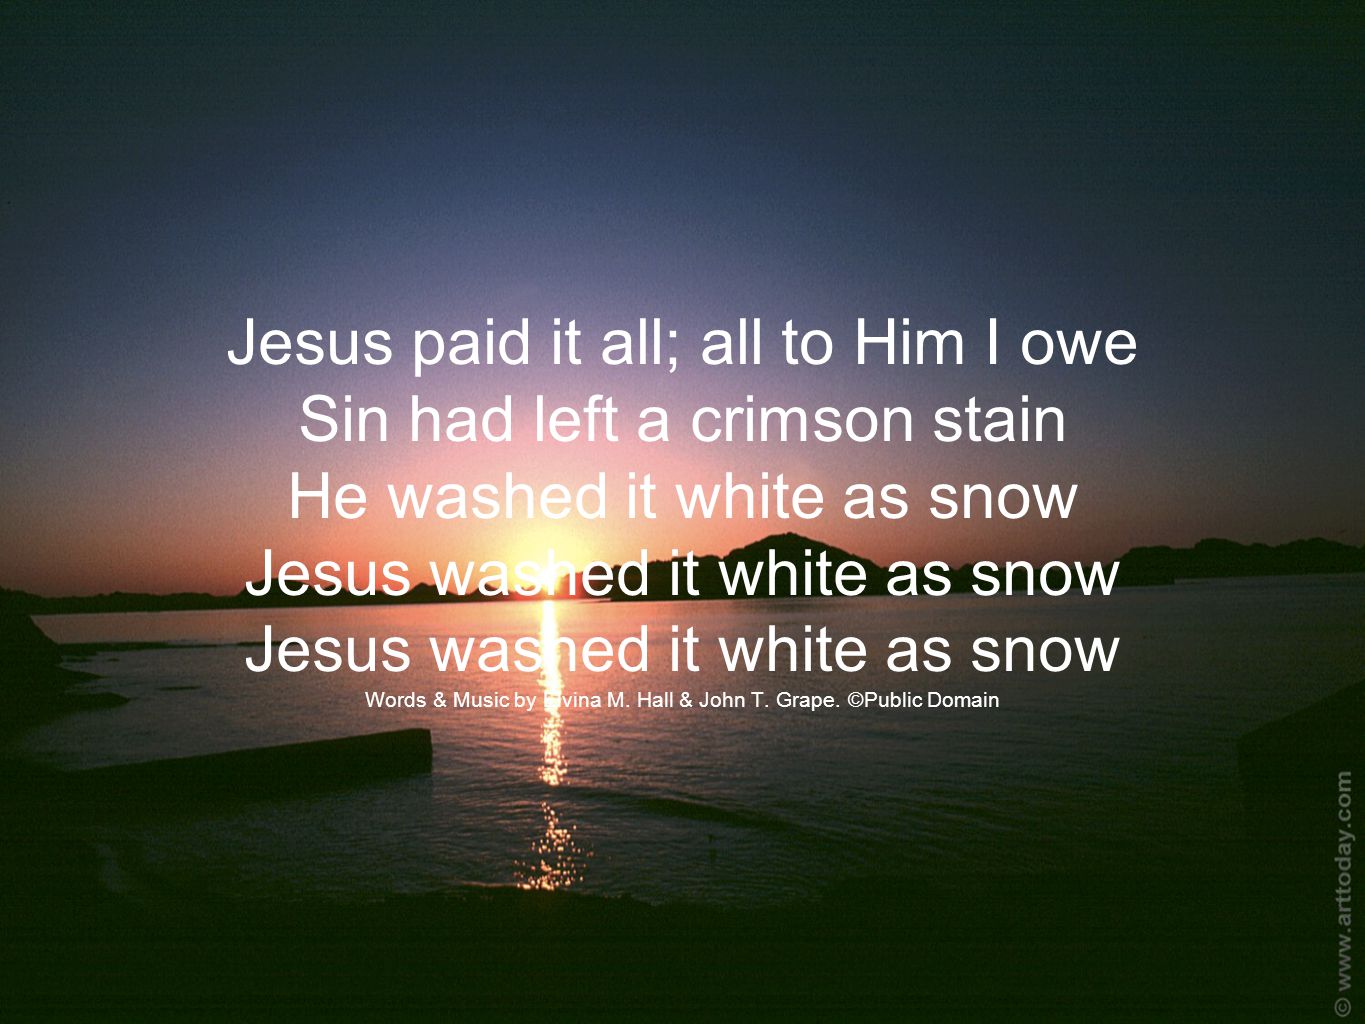 Jesus paid it all; all to Him I owe Sin had left a crimson stain He washed it white as snow Jesus washed it white as snow Jesus washed it white as snow Words & Music by Elvina M.